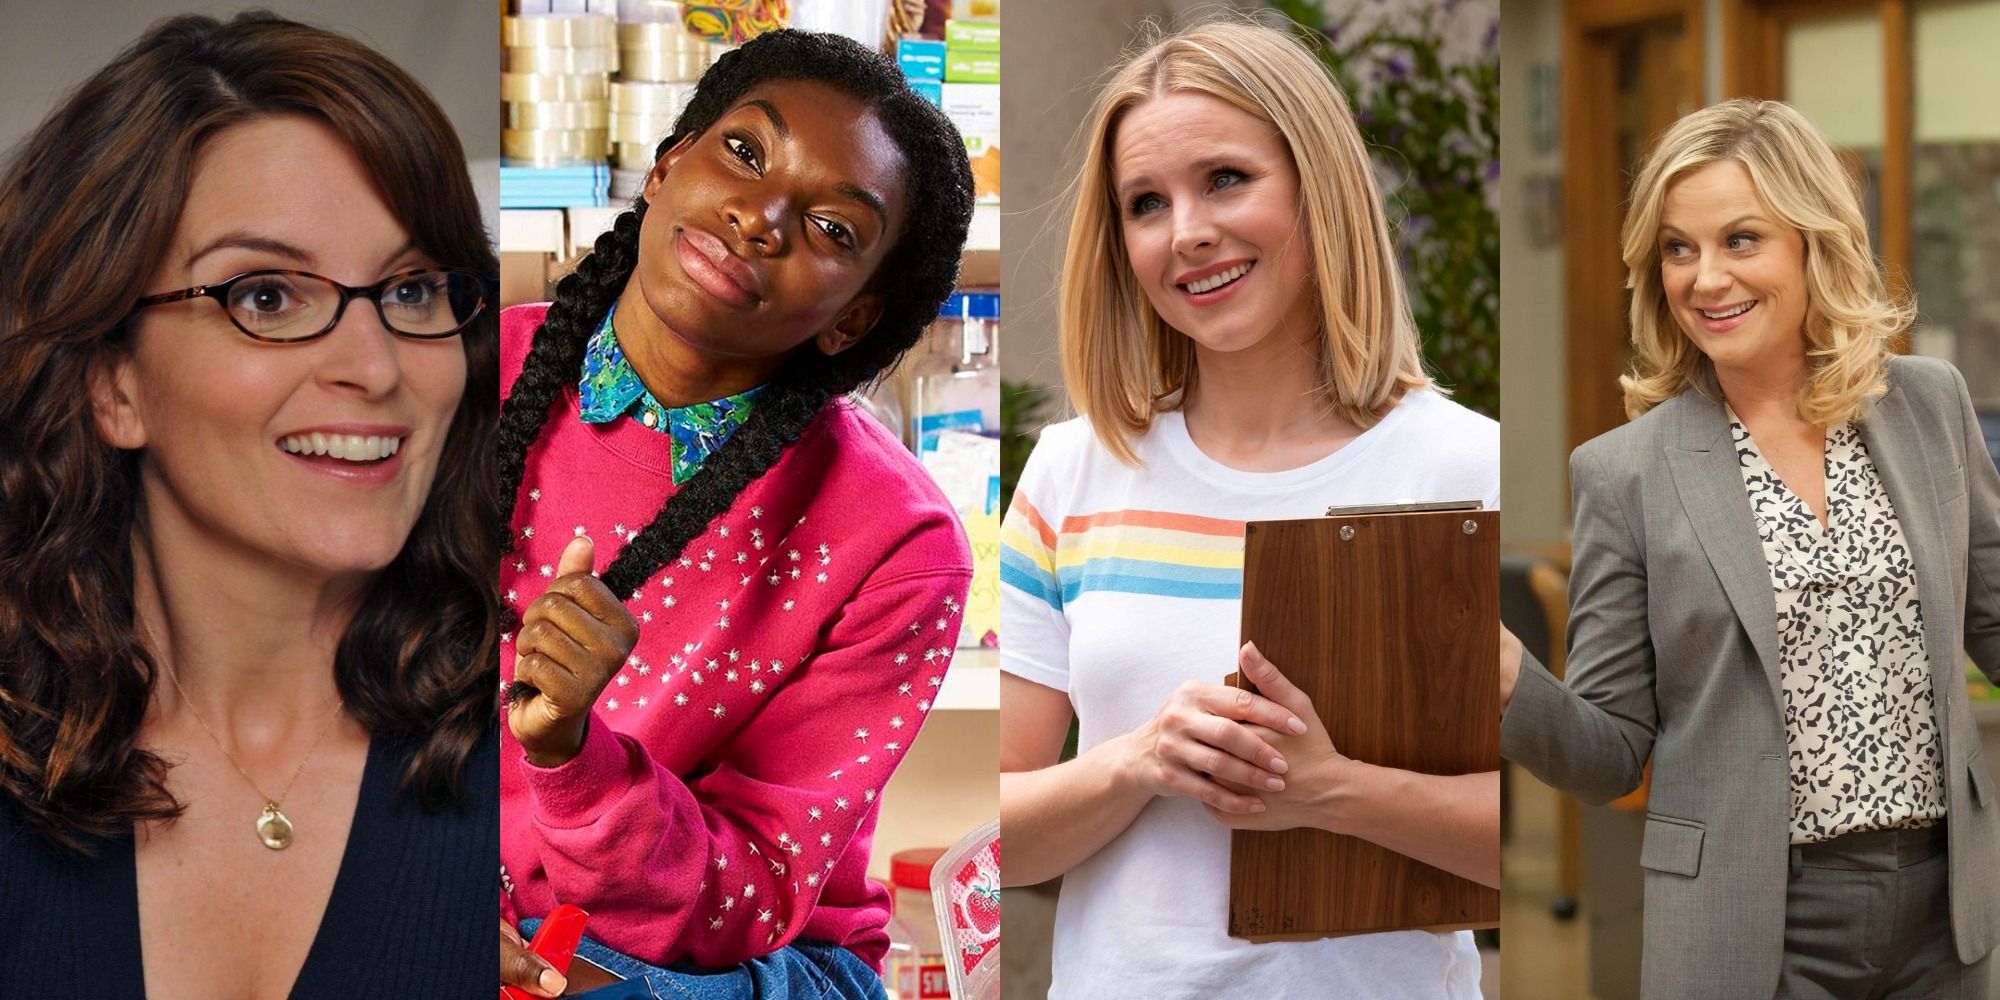 combined images of Tina Fey, Michaela Coel, Kristen Bell, and Amy Poehler in various sitcoms